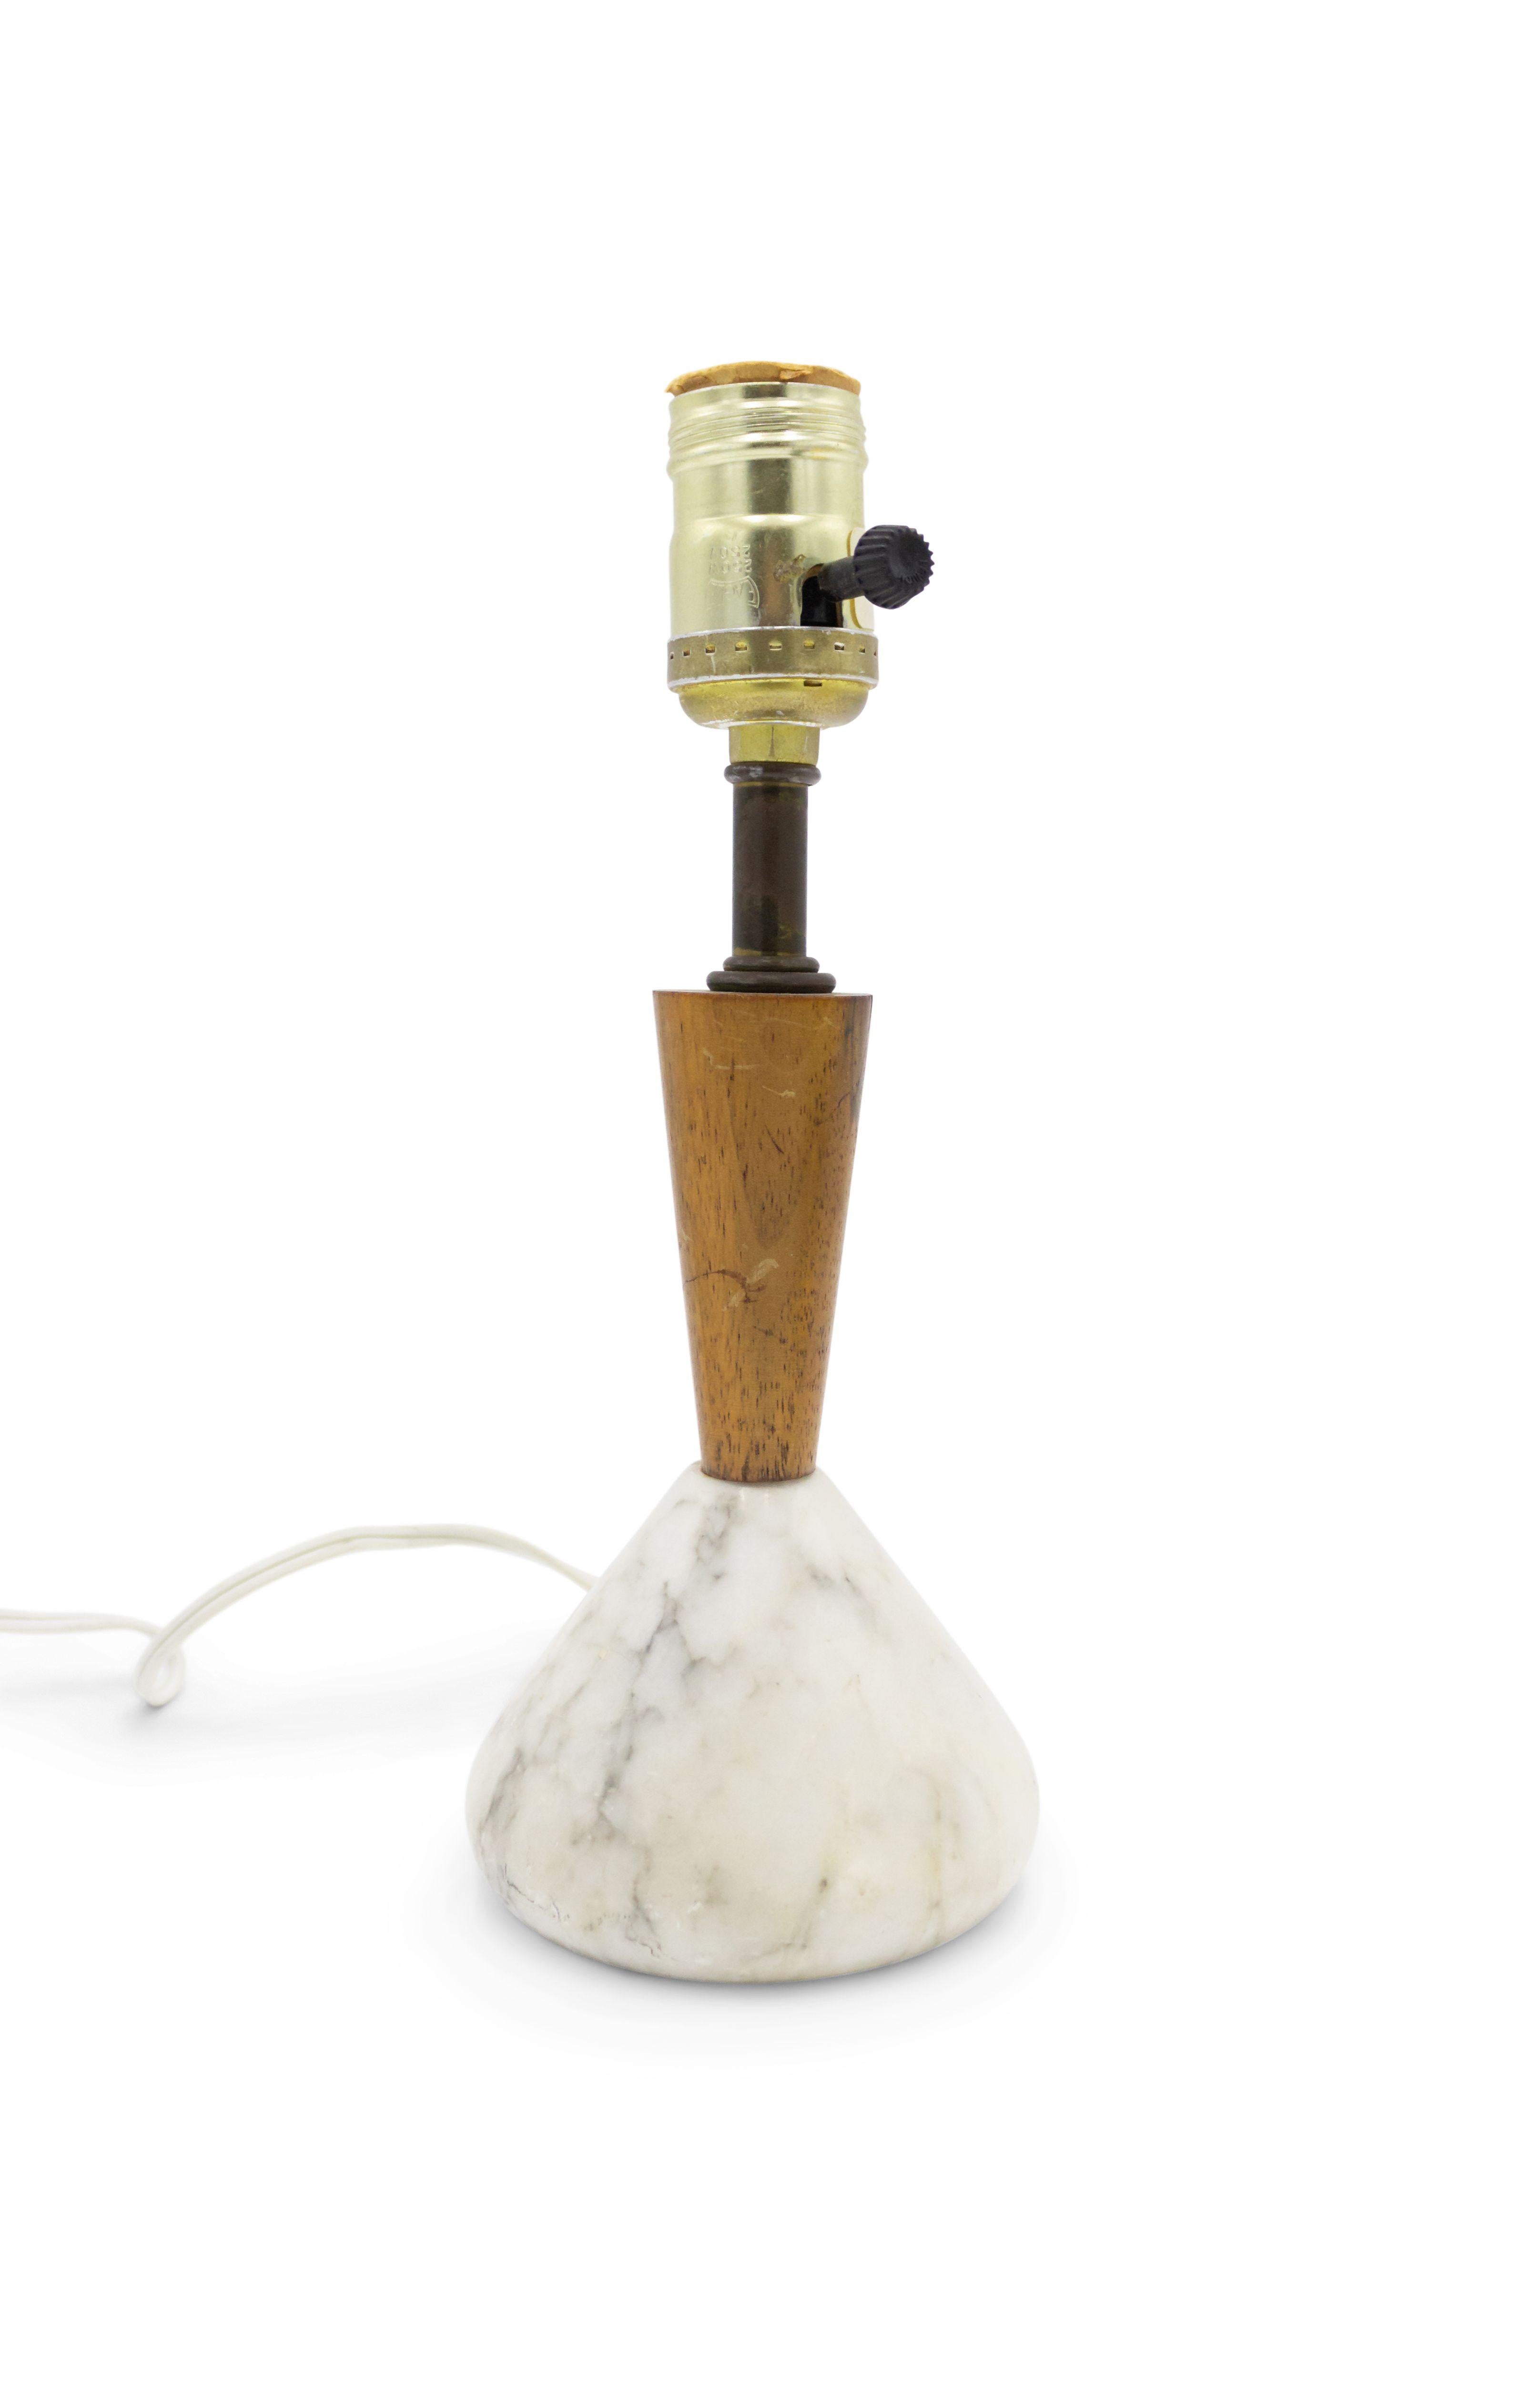 American Mid-Century (1960s) small table lamp with a white marble cone shaped base over a tapered teak neck supporting a lamp shade.